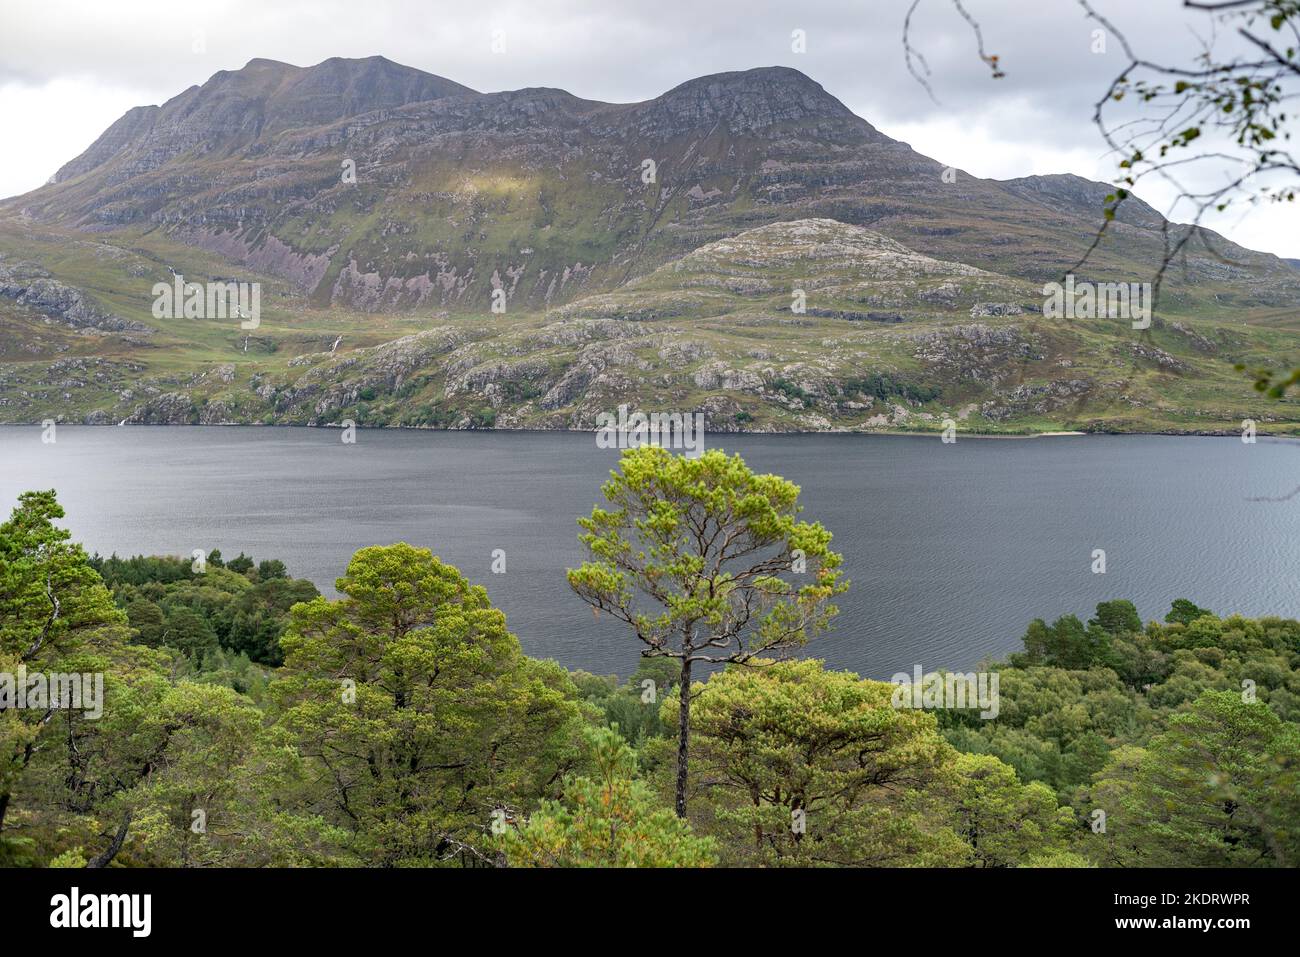 UK, Scotland, Ross and Cromarty, Wester Ross Highlands. Ancient pinewoods of Beinn Eighe National Nature Reserve. Loch Maree & Slioch mountain. Stock Photo